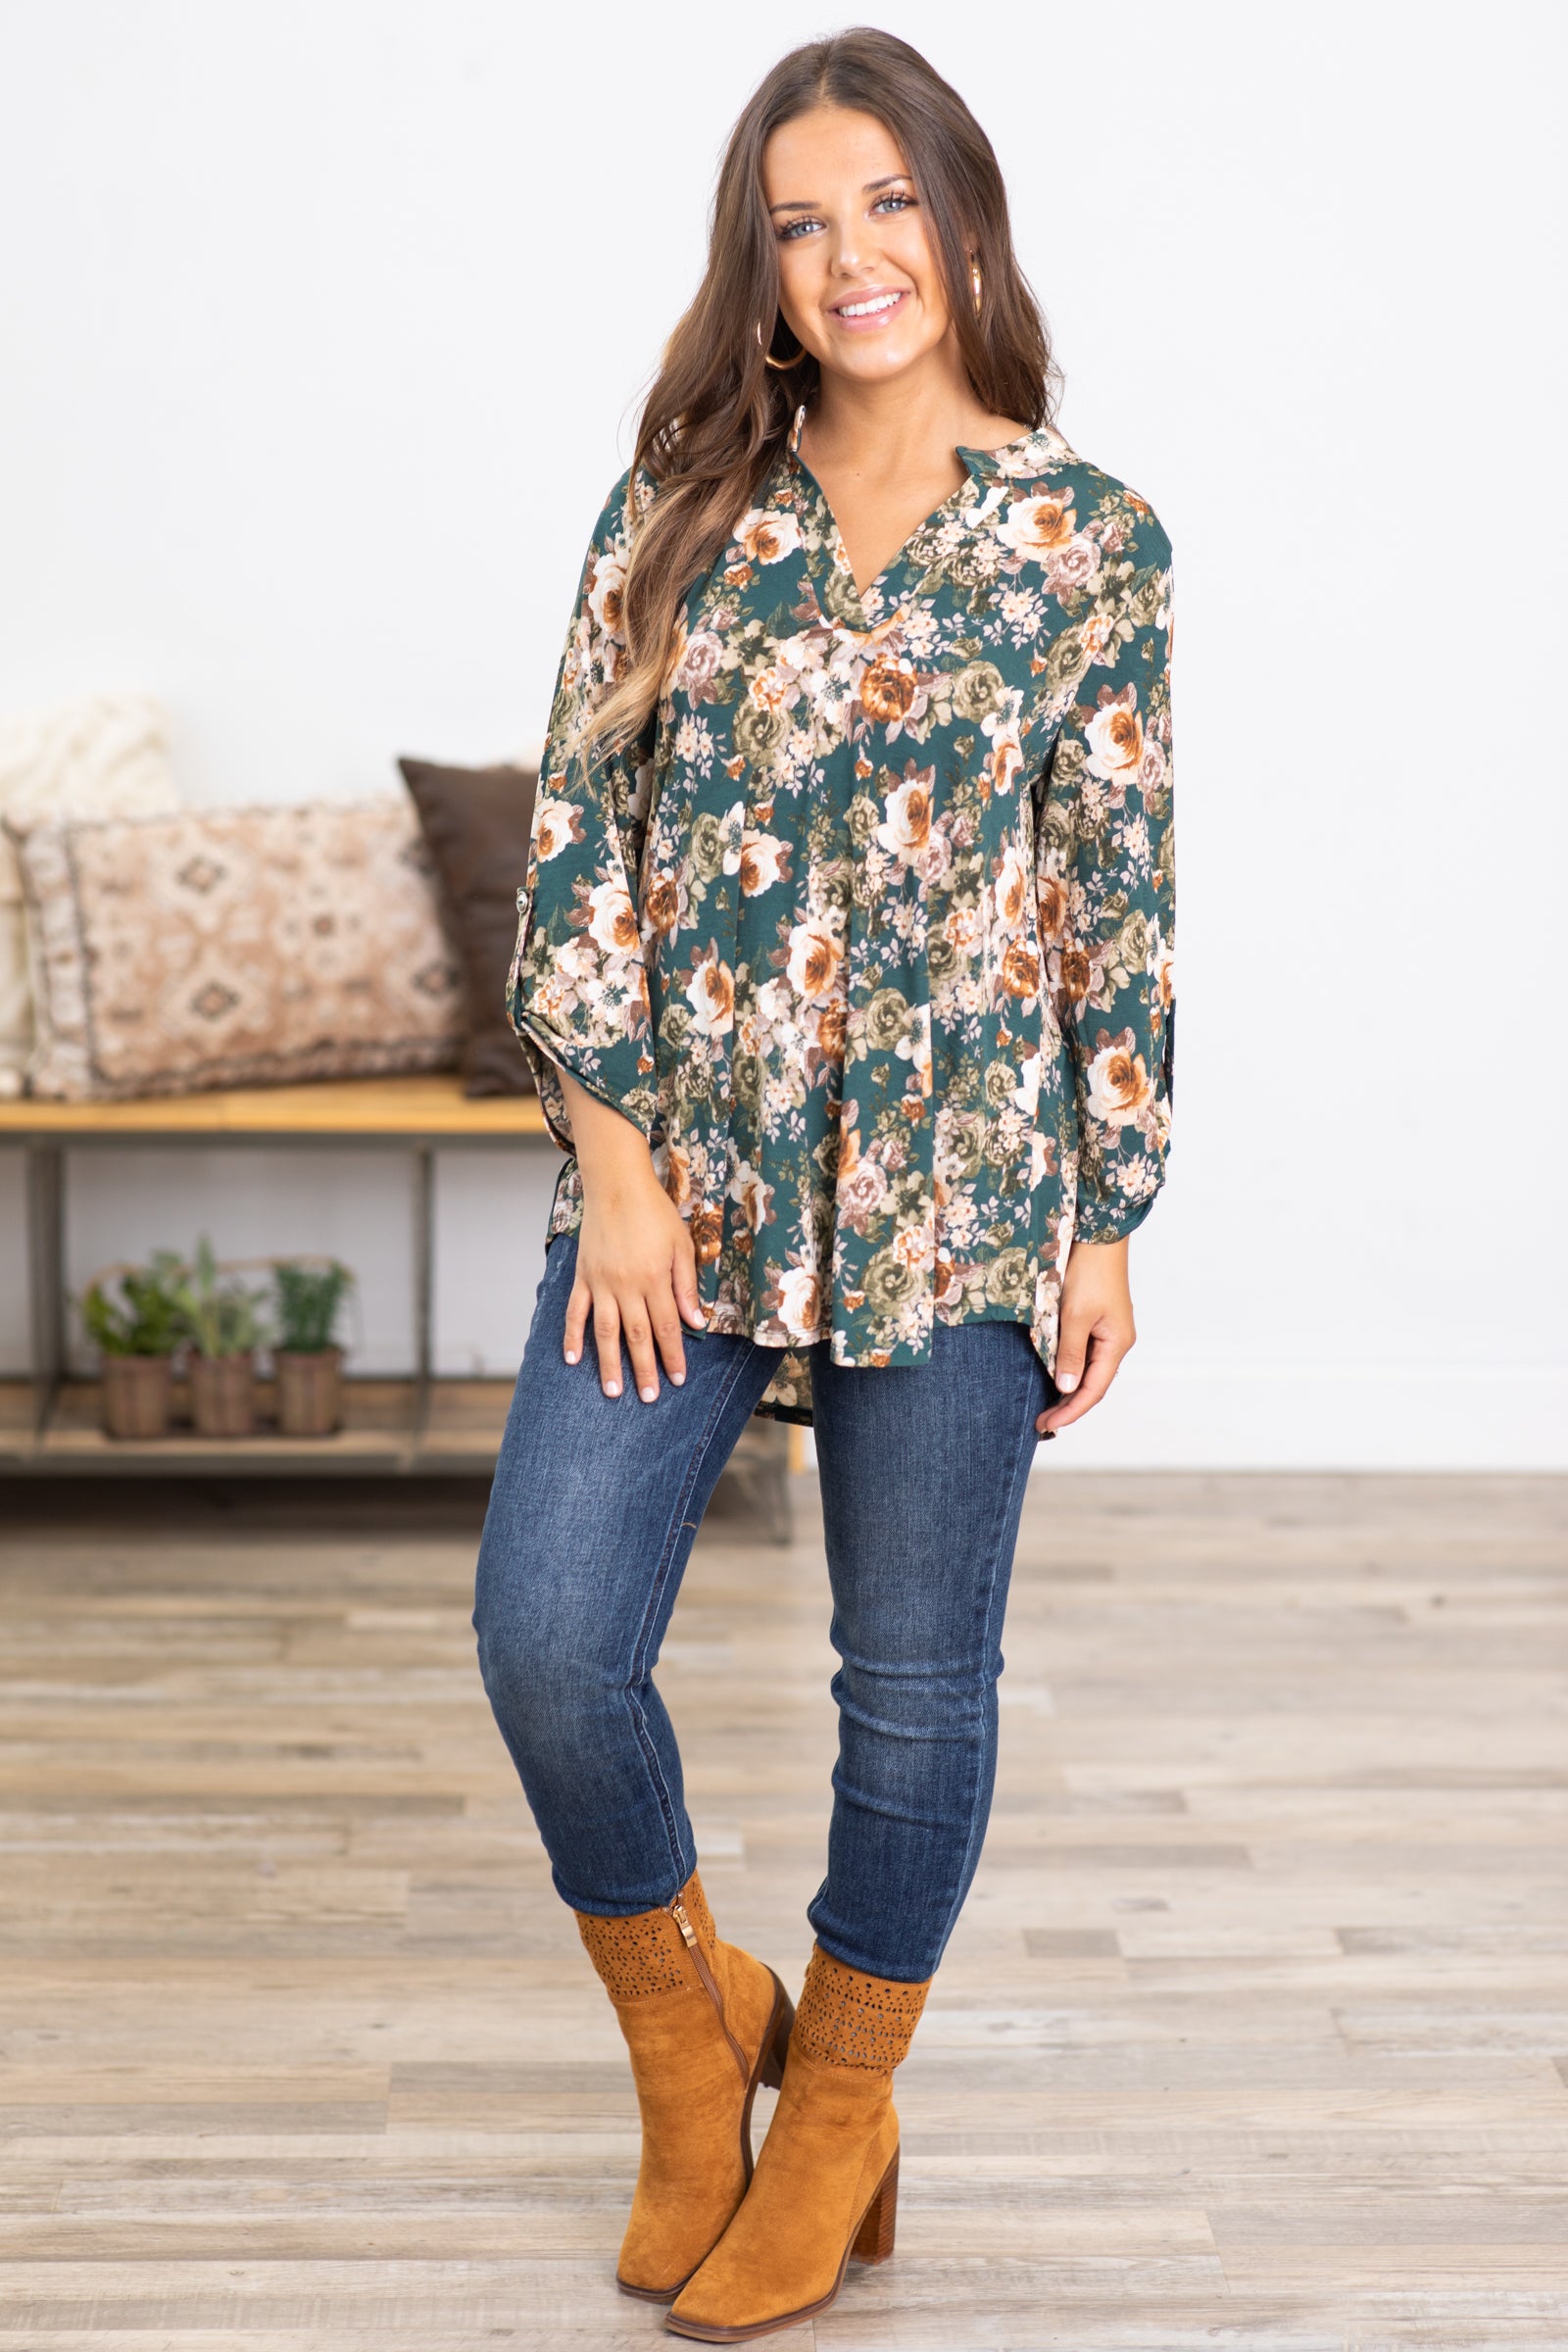 Emerald Green and Ivory Floral Print Top